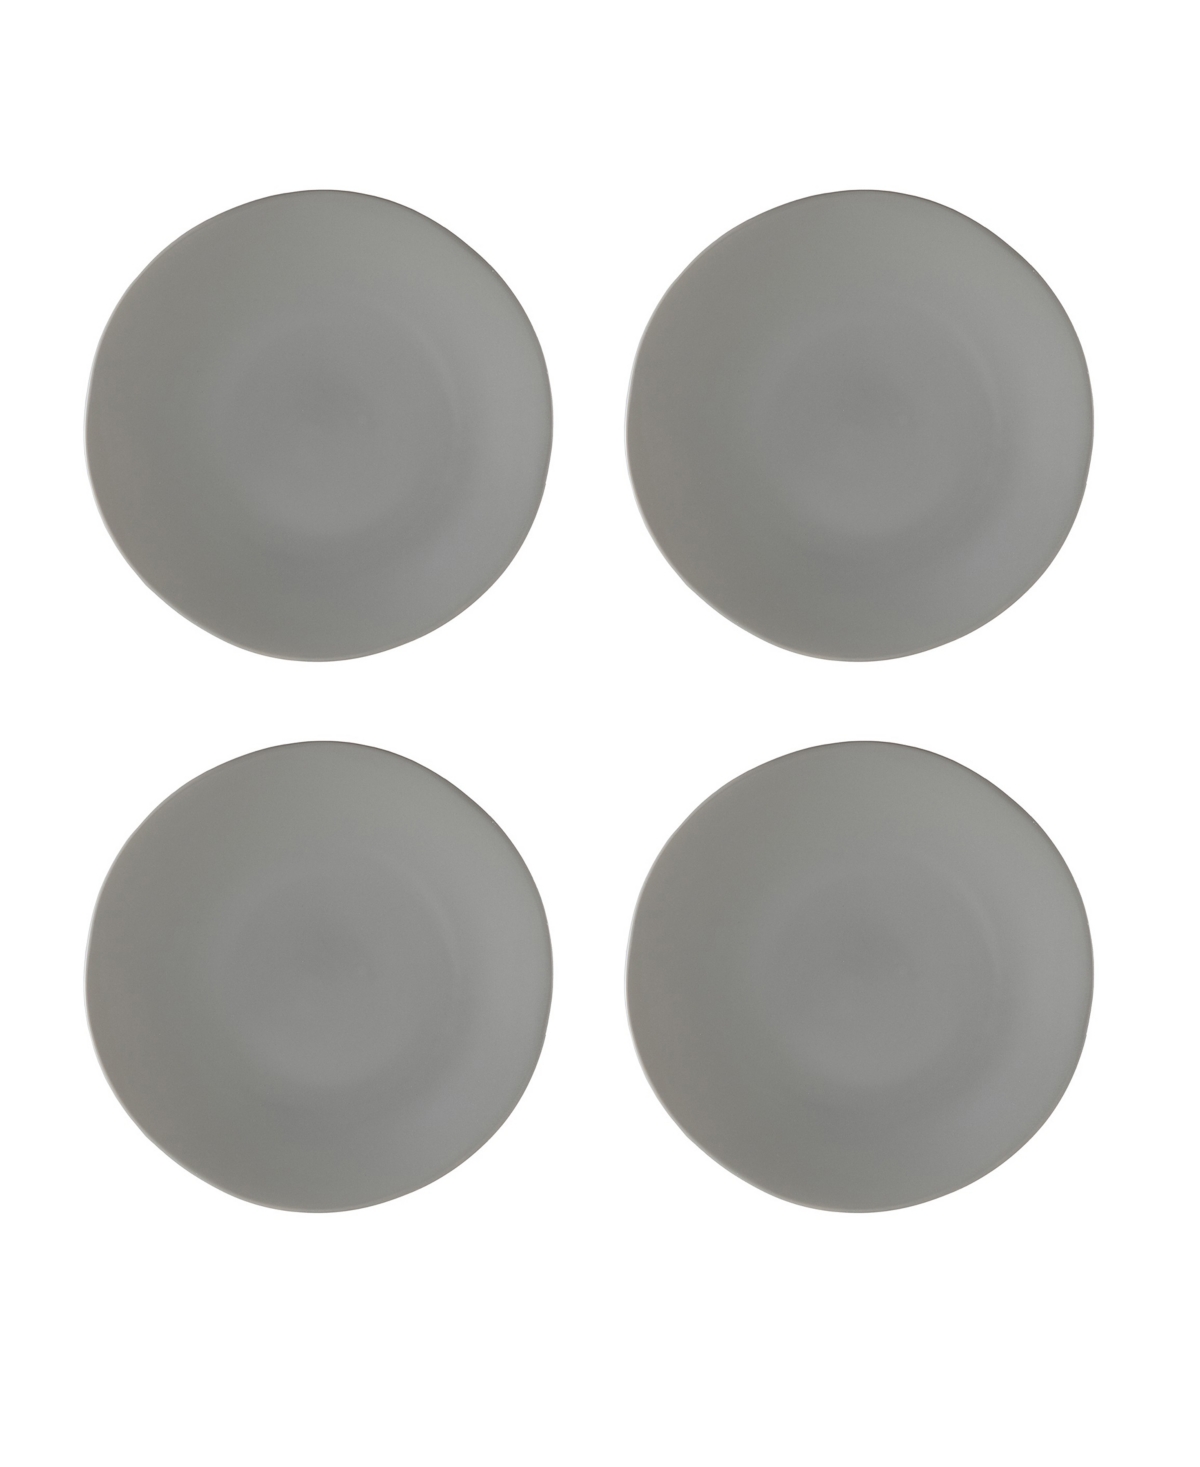 Heirloom Charger Plates, Set of 4 - Blush